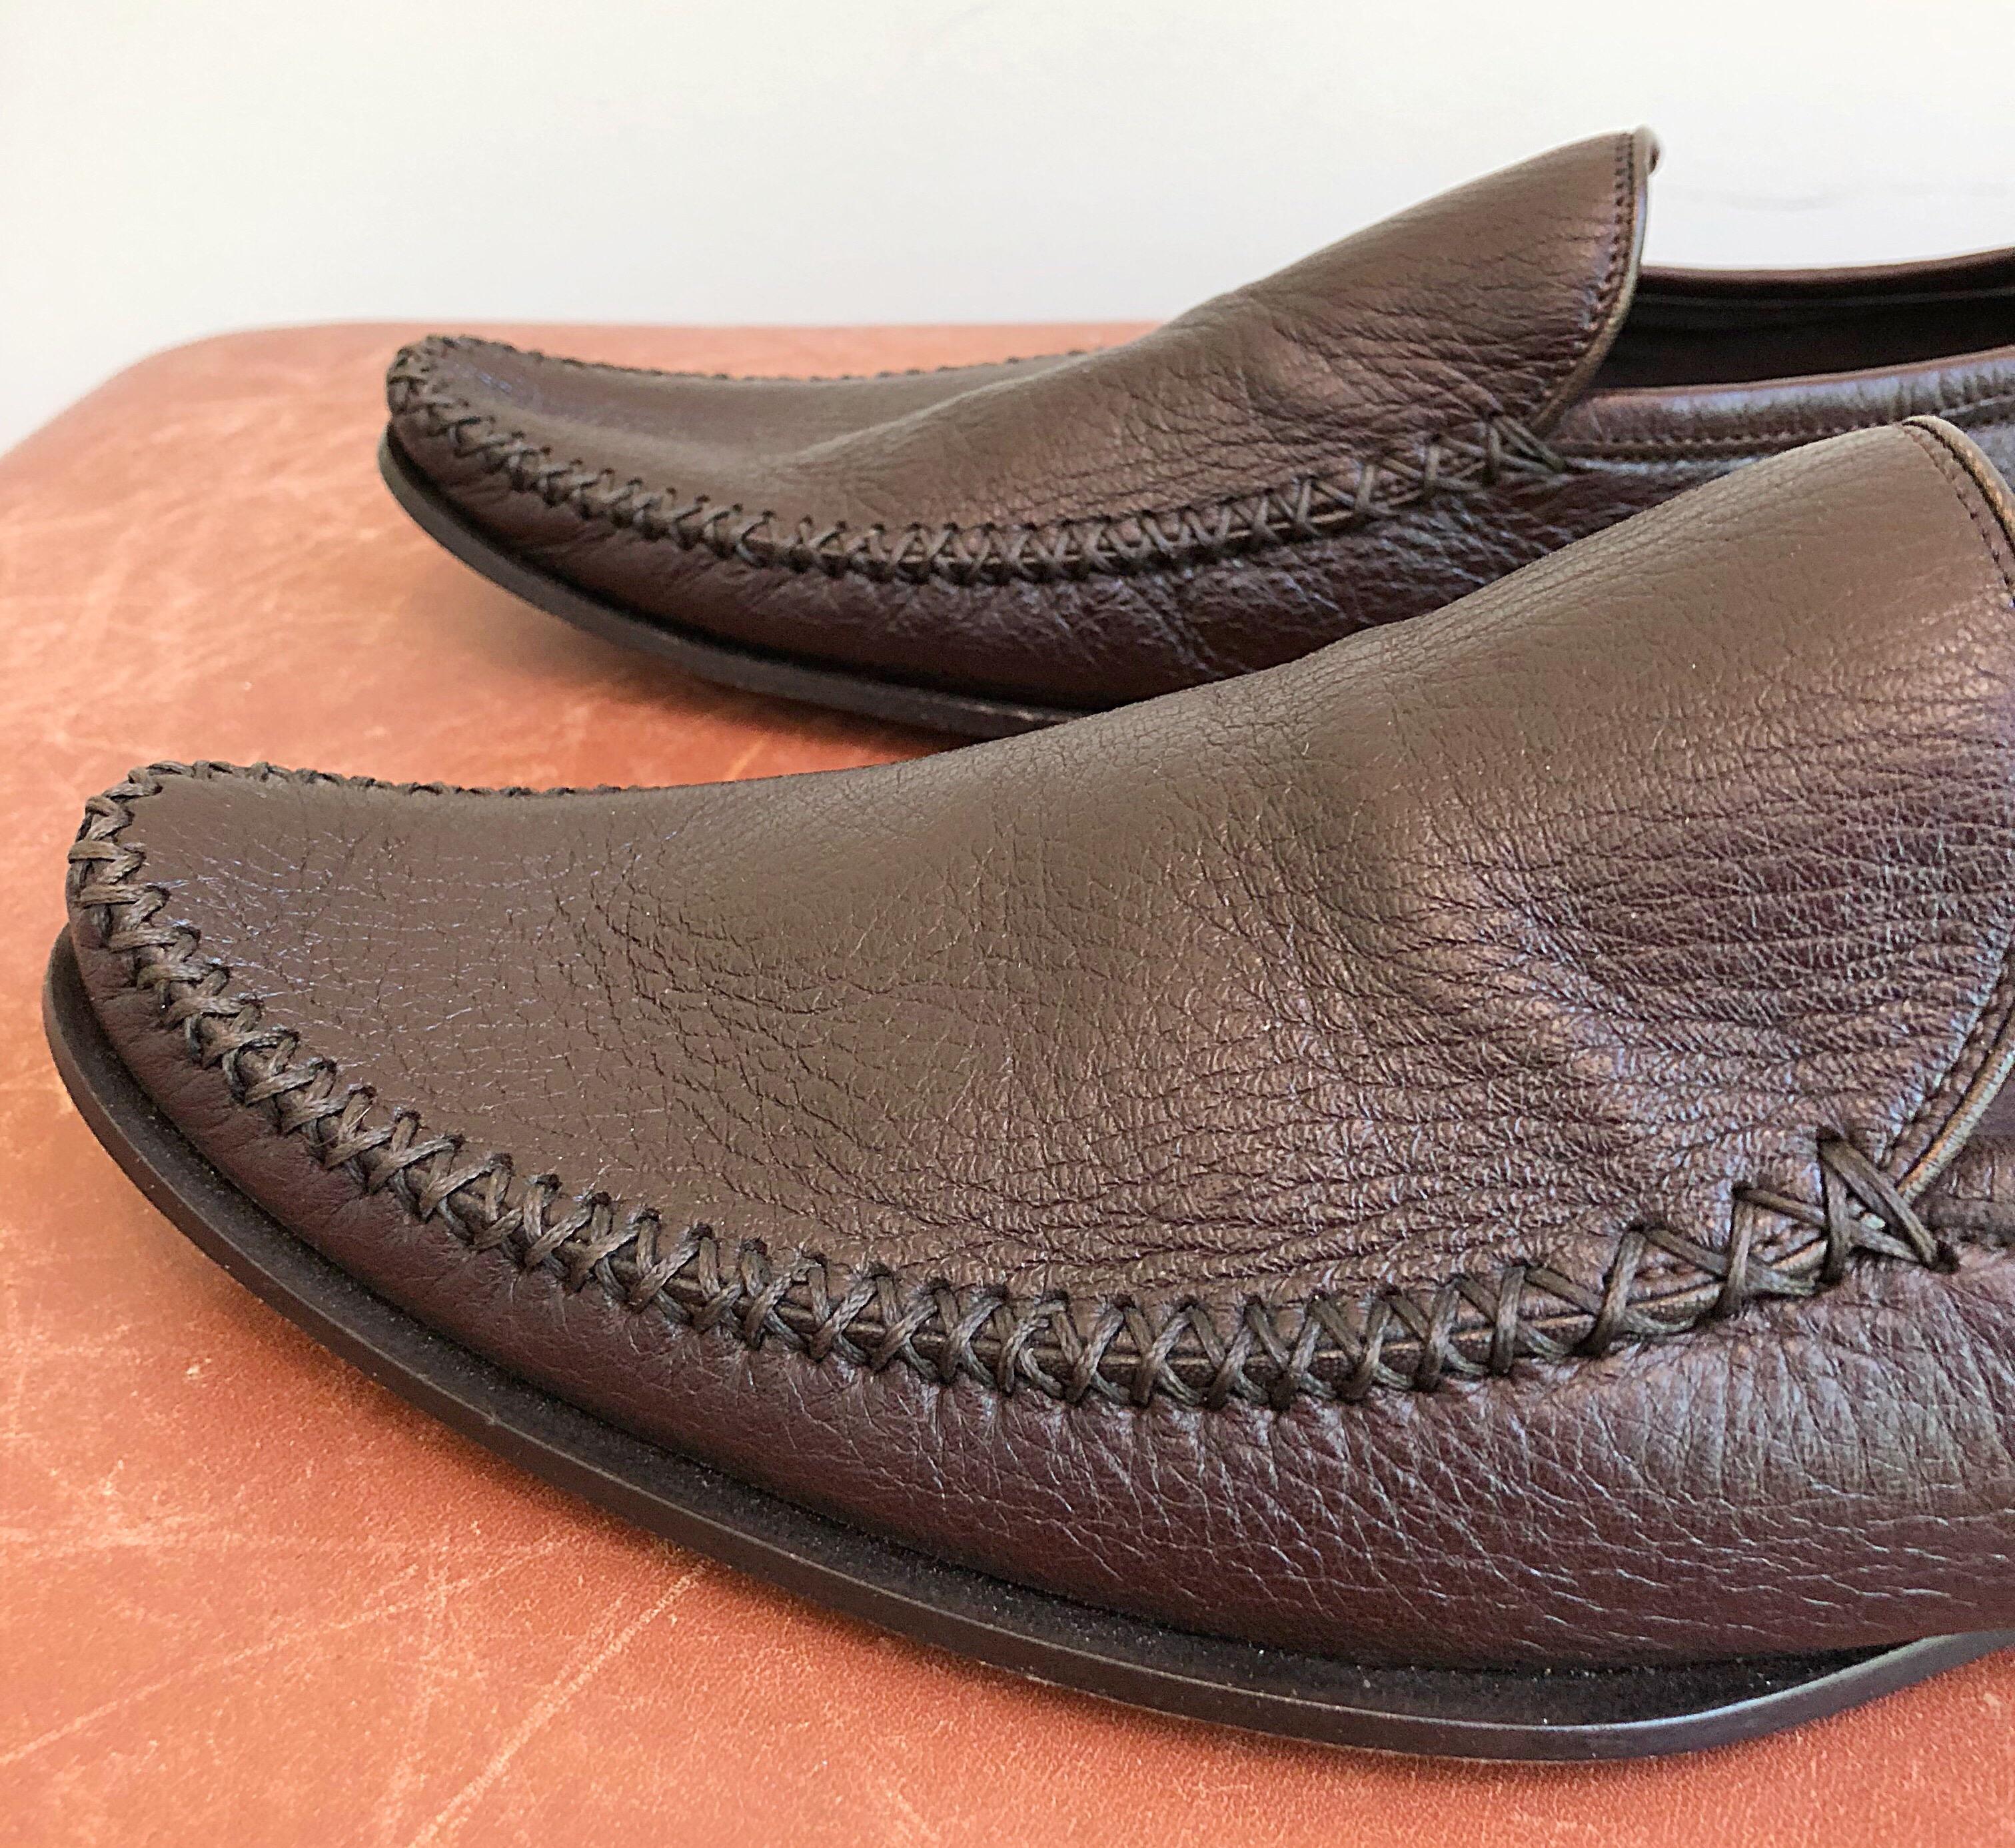 Brand new 2000s vintage Bottega Veneta women’s chocolate brown leather pointy toe loafers / flats! Super versatile pair of shoes that can easily be dressed up or down. Great with jeans, shorts, a skirt or trousers. In great unworn condition.